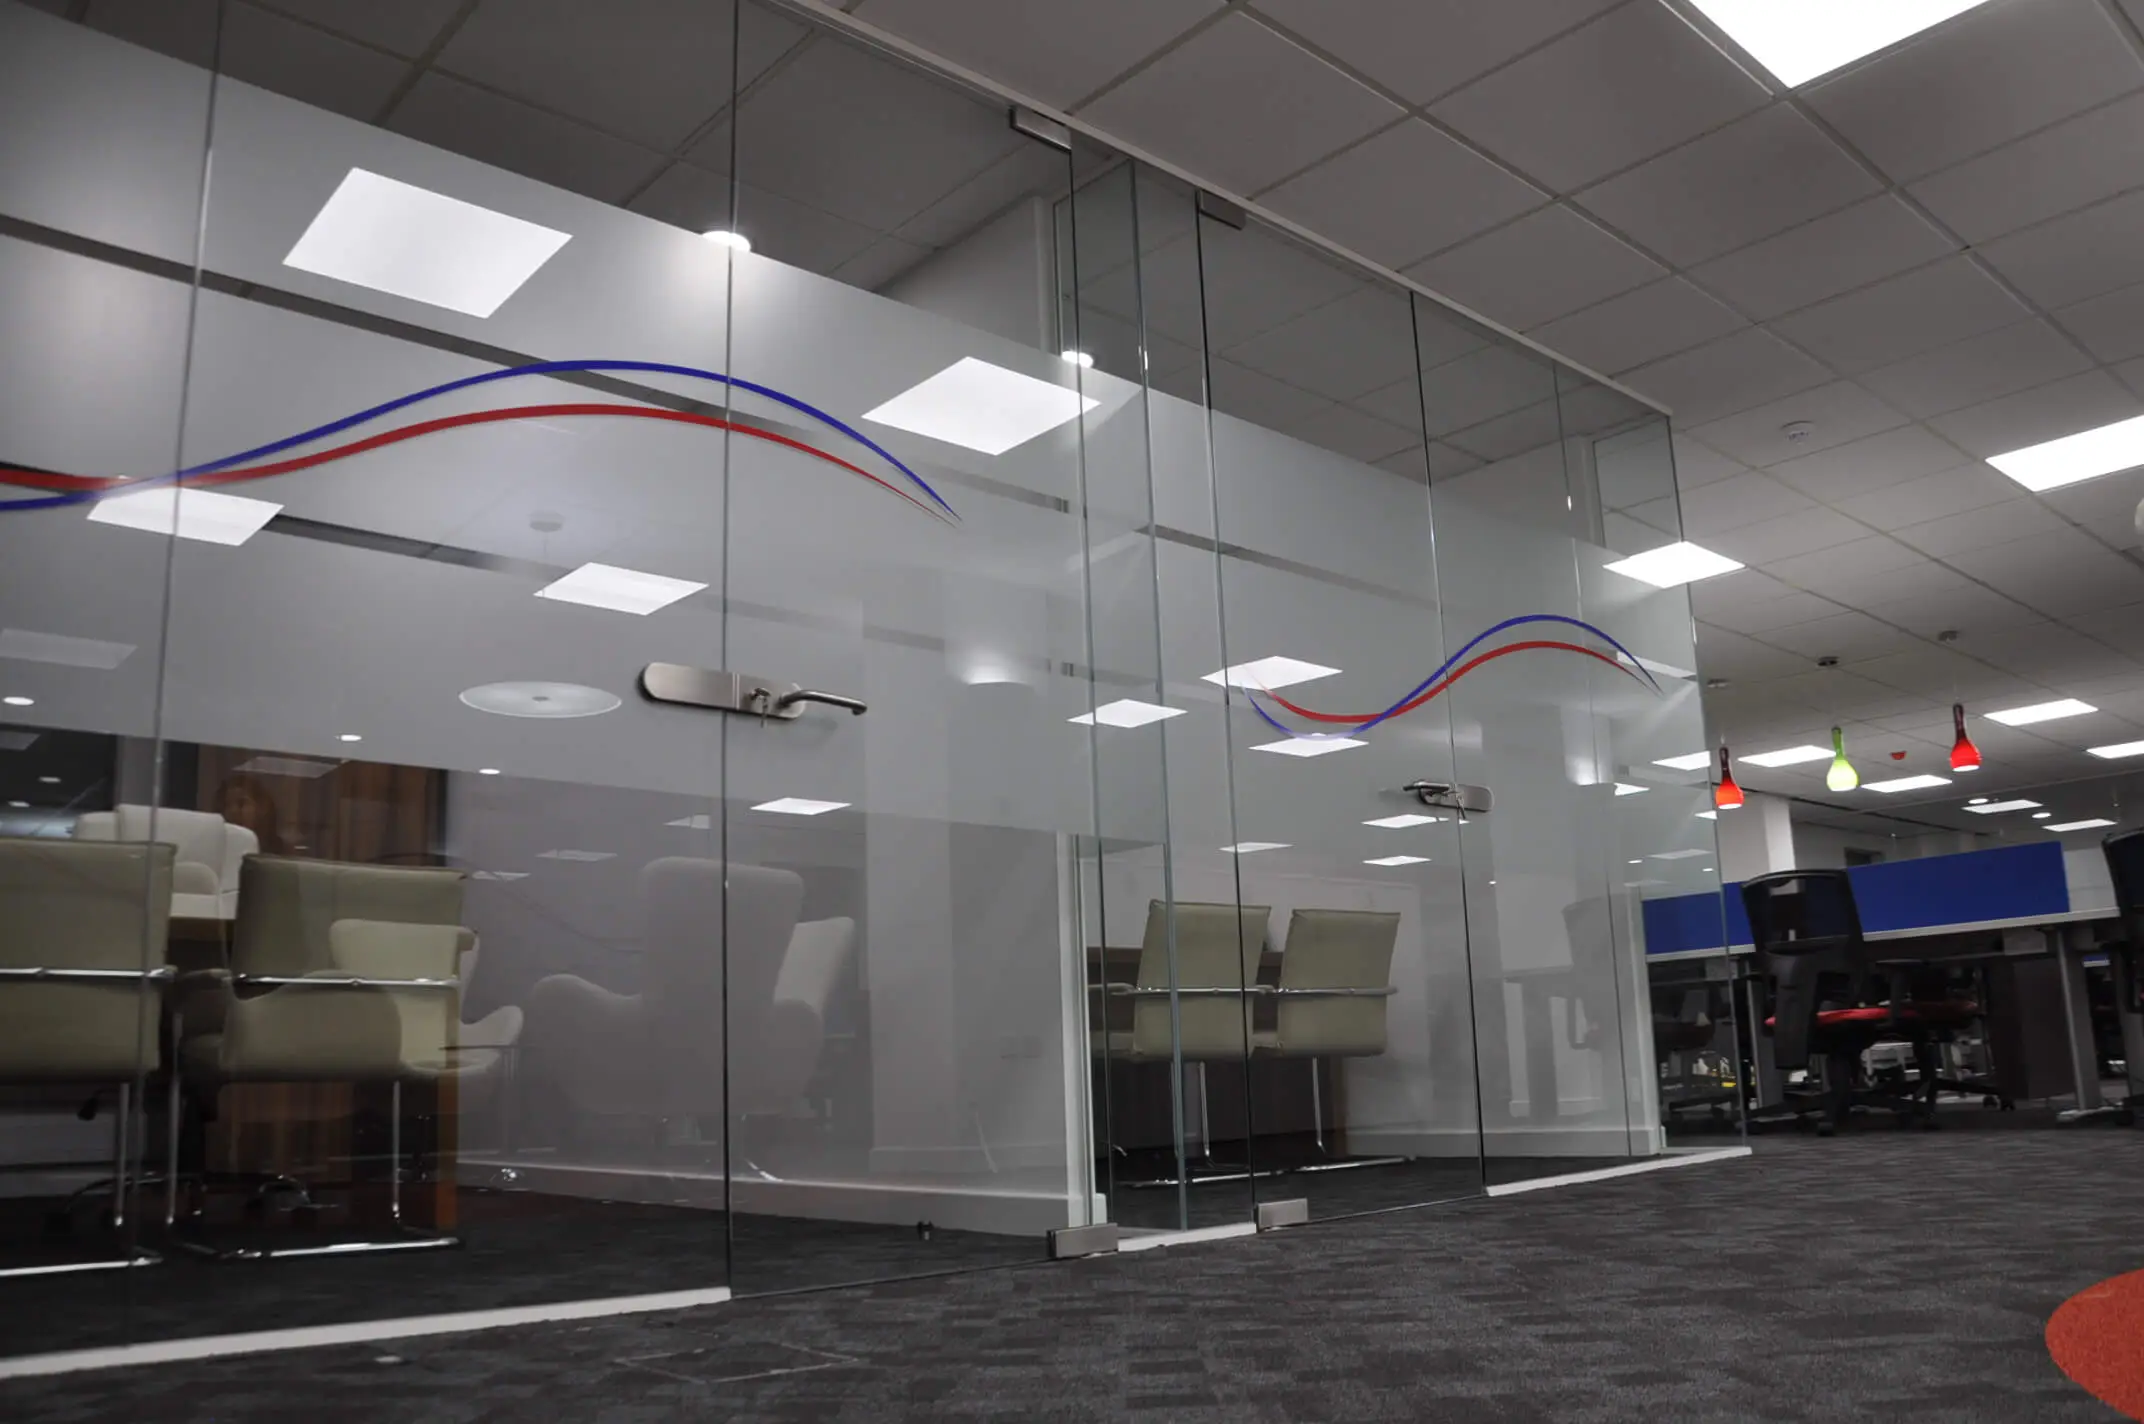 Executive work spaces area and co working area divided with frameless glass partitions